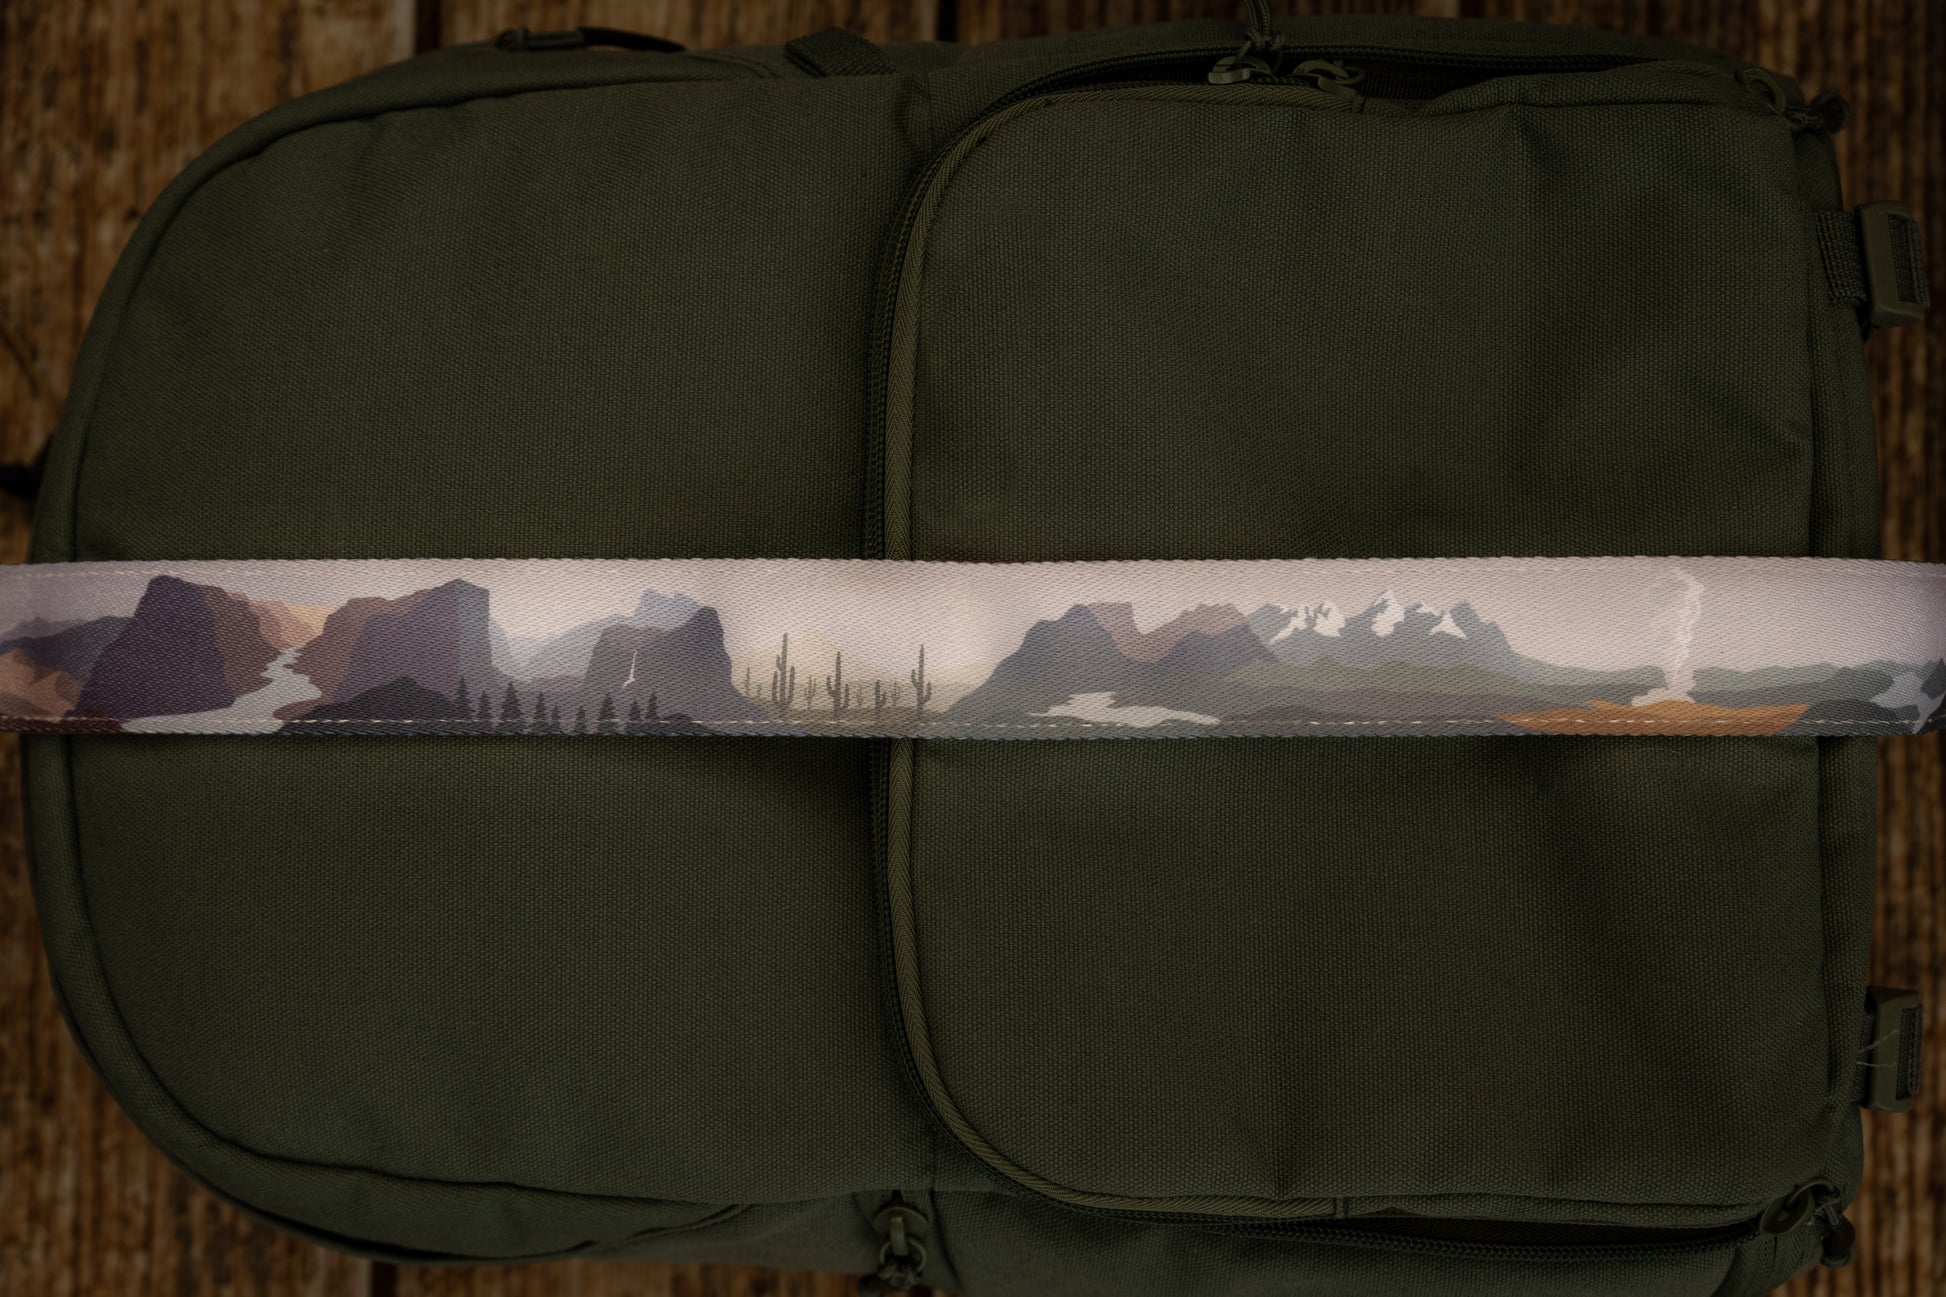 National parks camera strap in color laying out on green brevite back pack. - Best camera strap for Canon cameras and all other makes and models.